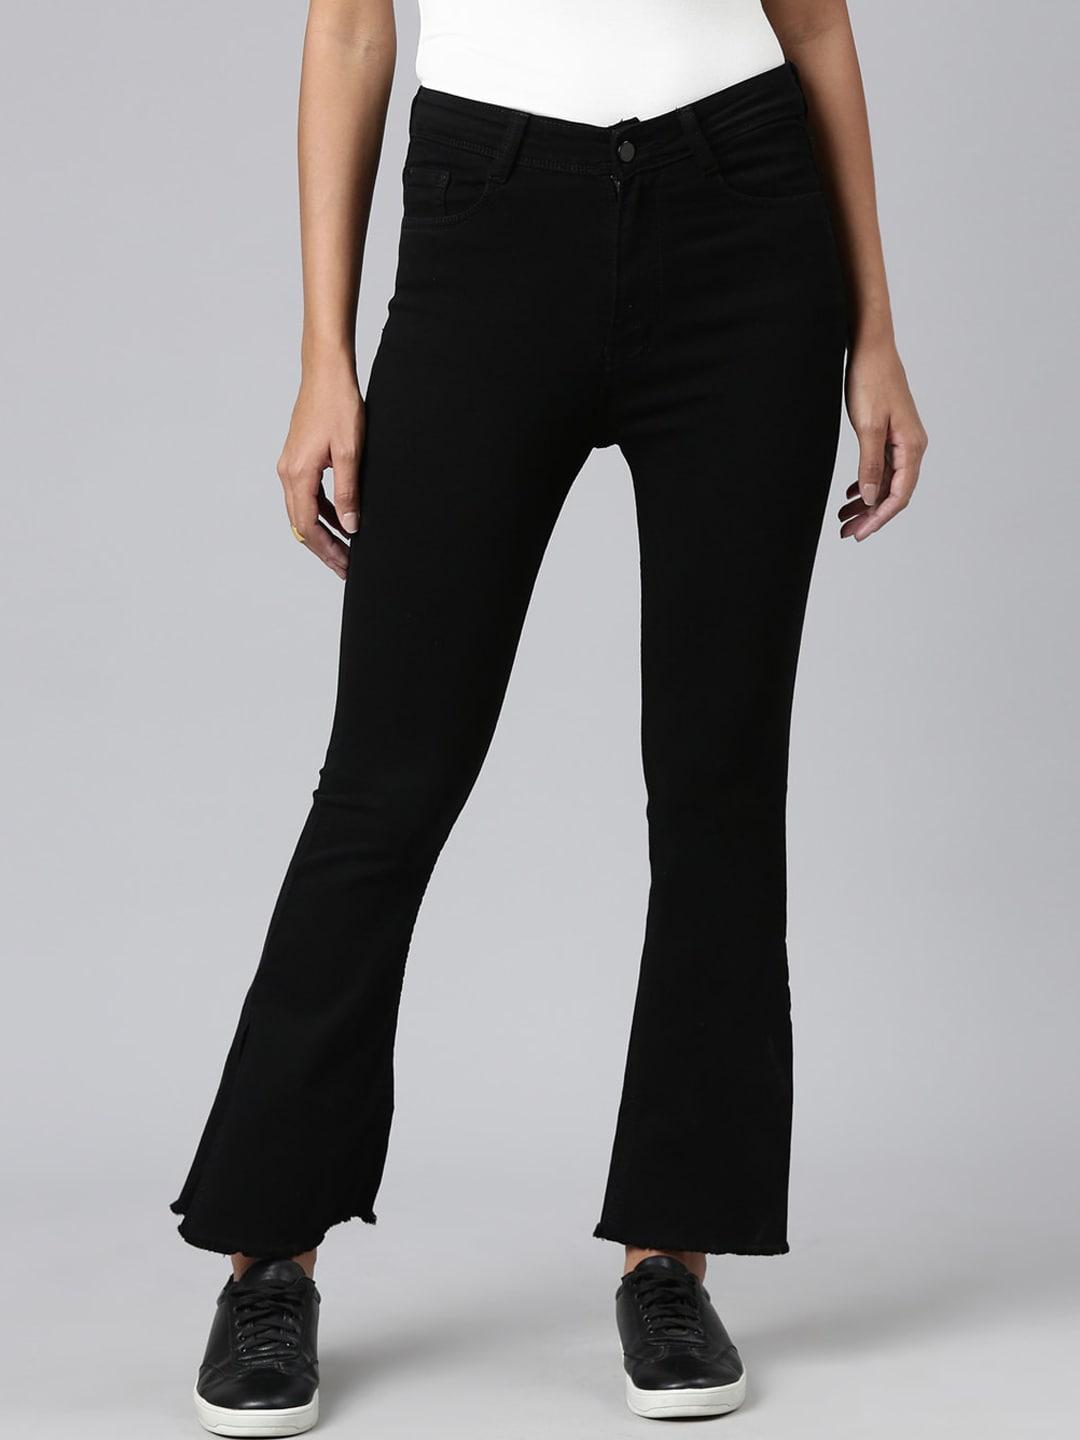 showoff-women-mid-rise-clean-look-flared-stretchable-jeans